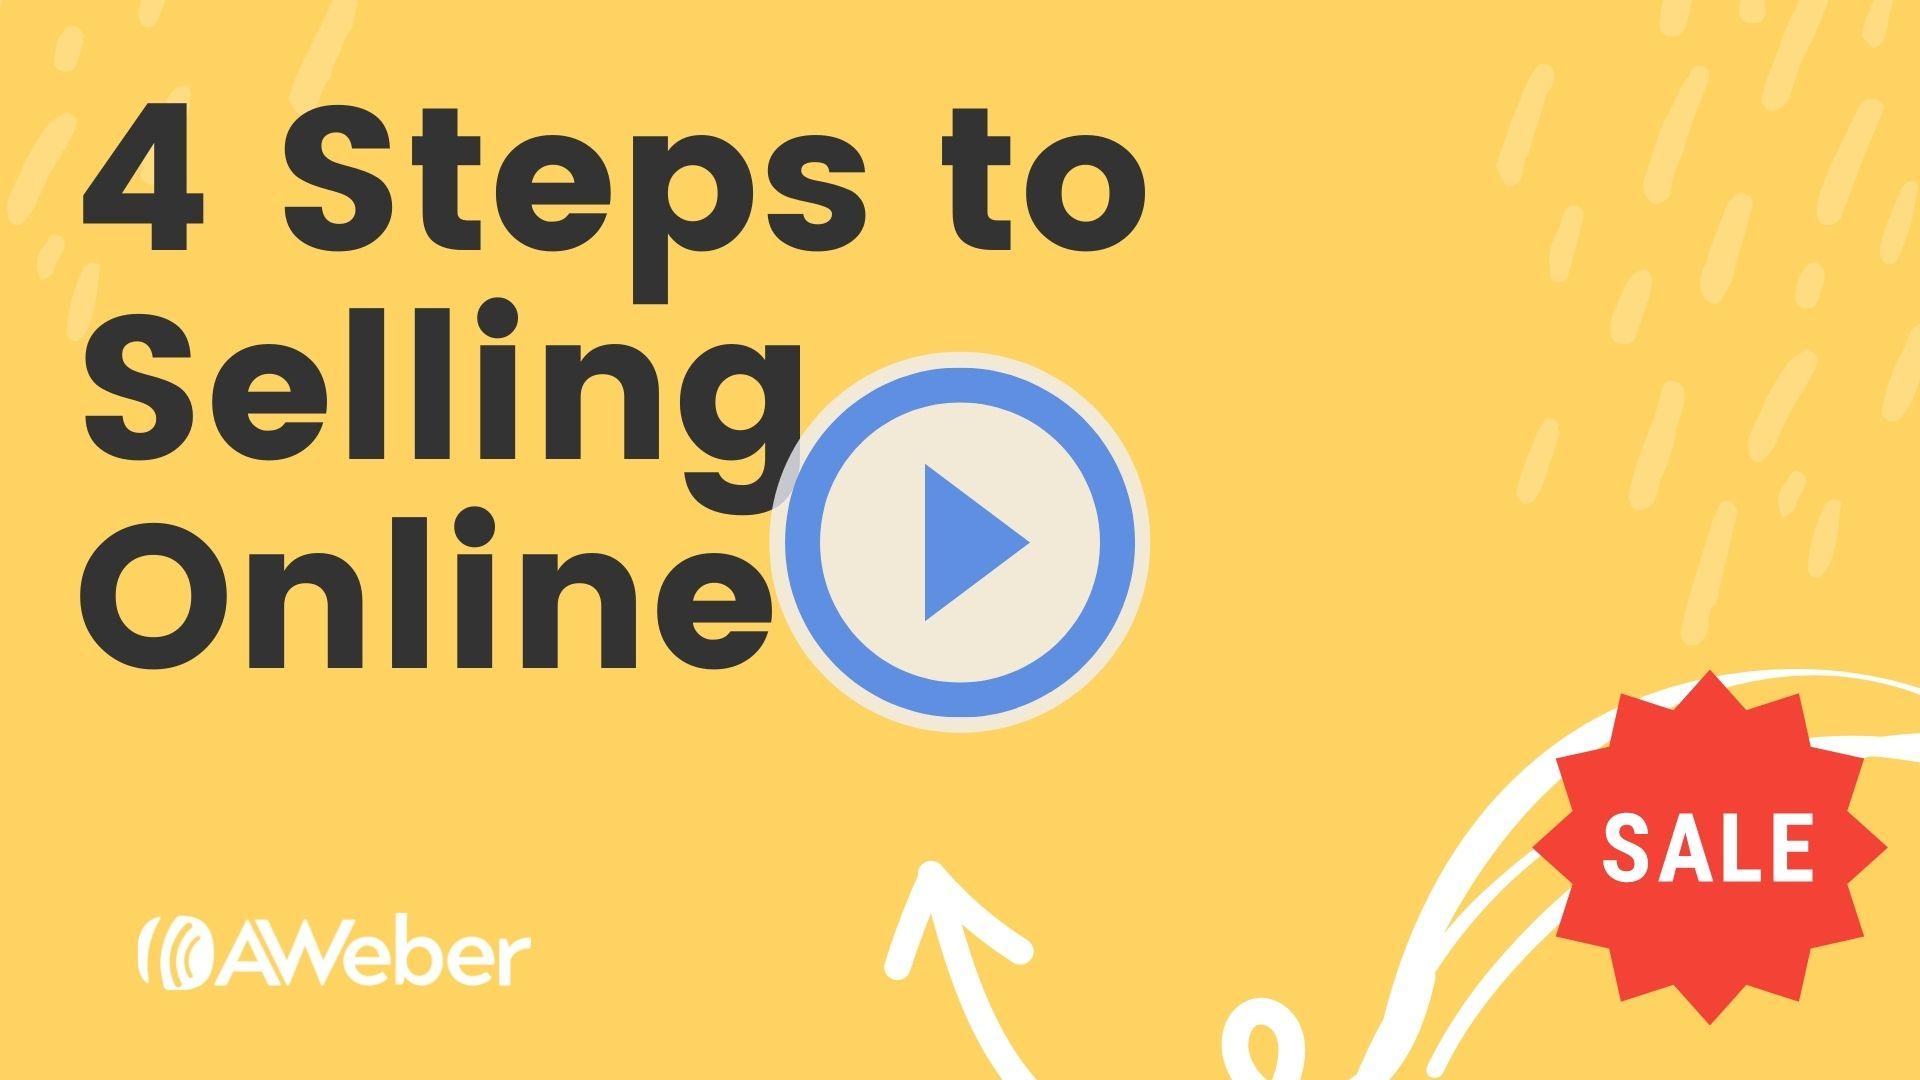 4 Steps to Selling Online